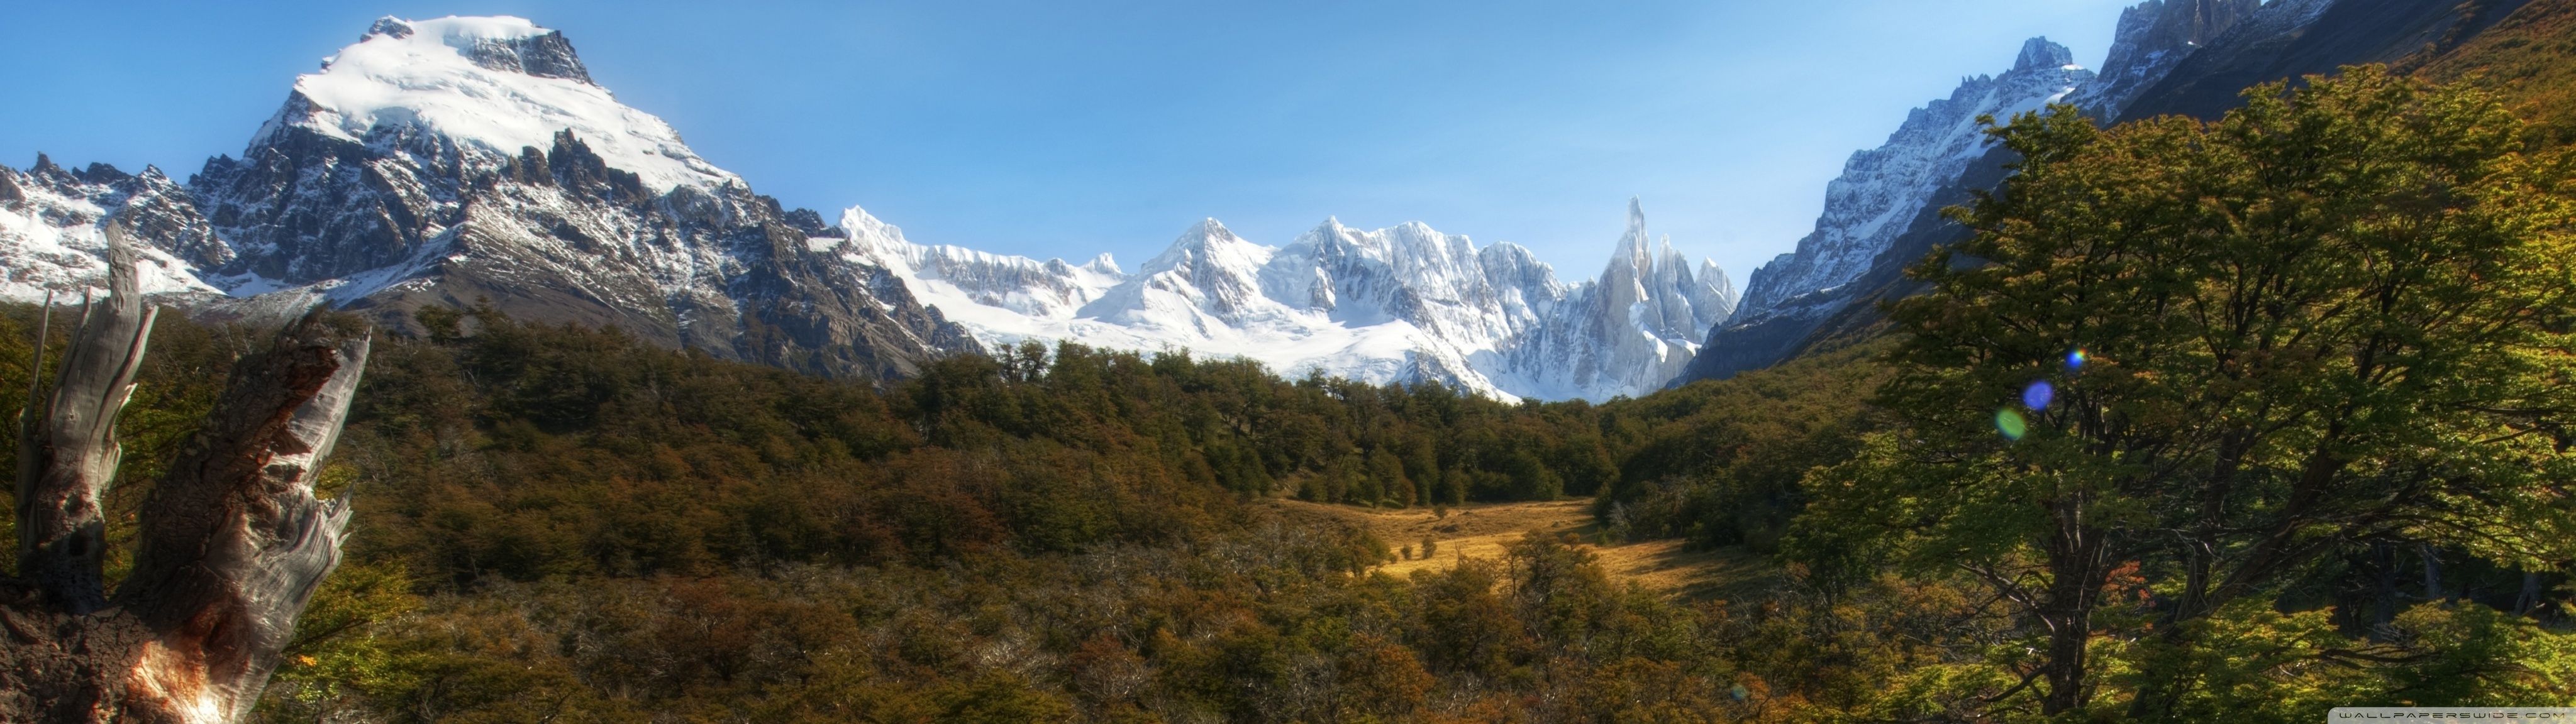 Andes Mountains, Patagonia, Argentina Ultra HD Desktop Background Wallpaper for 4K UHD TV, Multi Display, Dual Monitor, Tablet